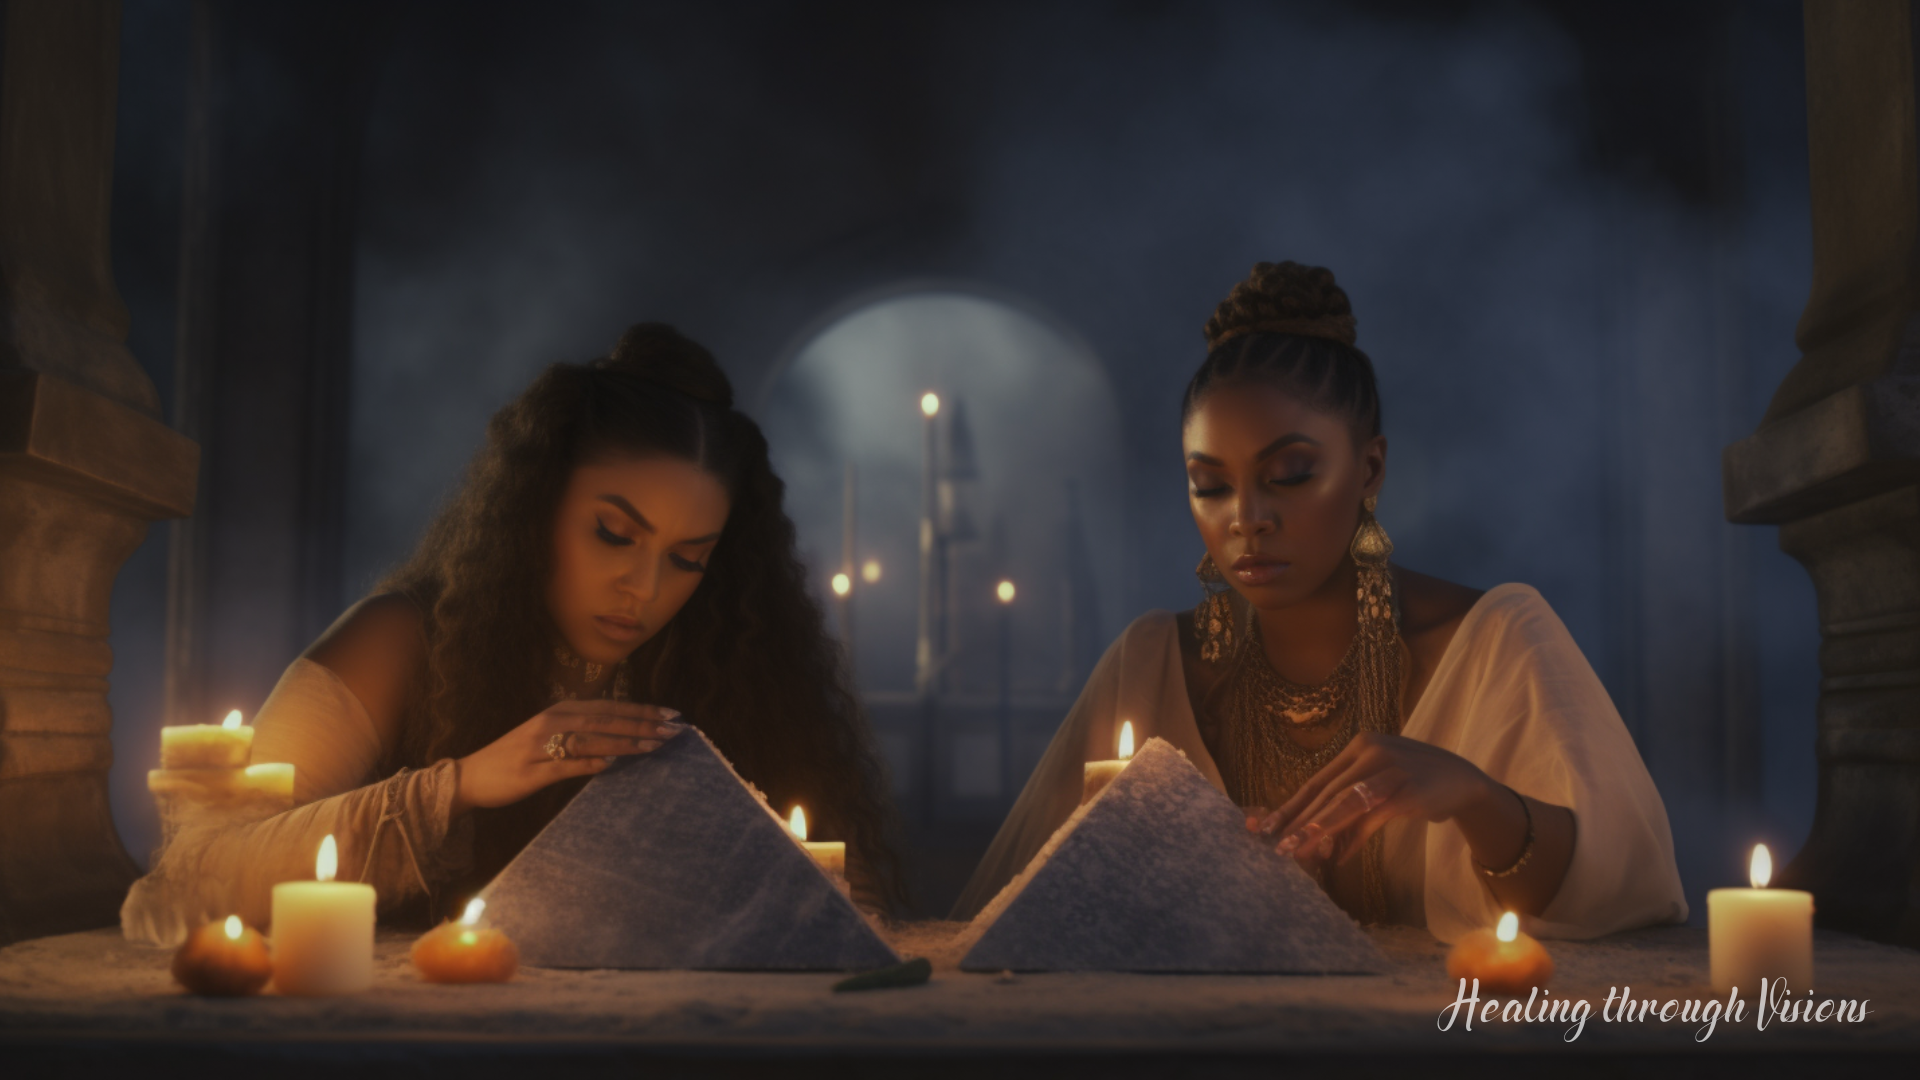 A mystical interpretation of sacred ritual or ceremony, with two Black high priestesses seated next to each other, hands placed on a beautifully adorned pyramid crystal as they prepare for the signing of a soul contract. Candles and other spiritual elements are incorporated, creating an atmosphere of reverence and magic.